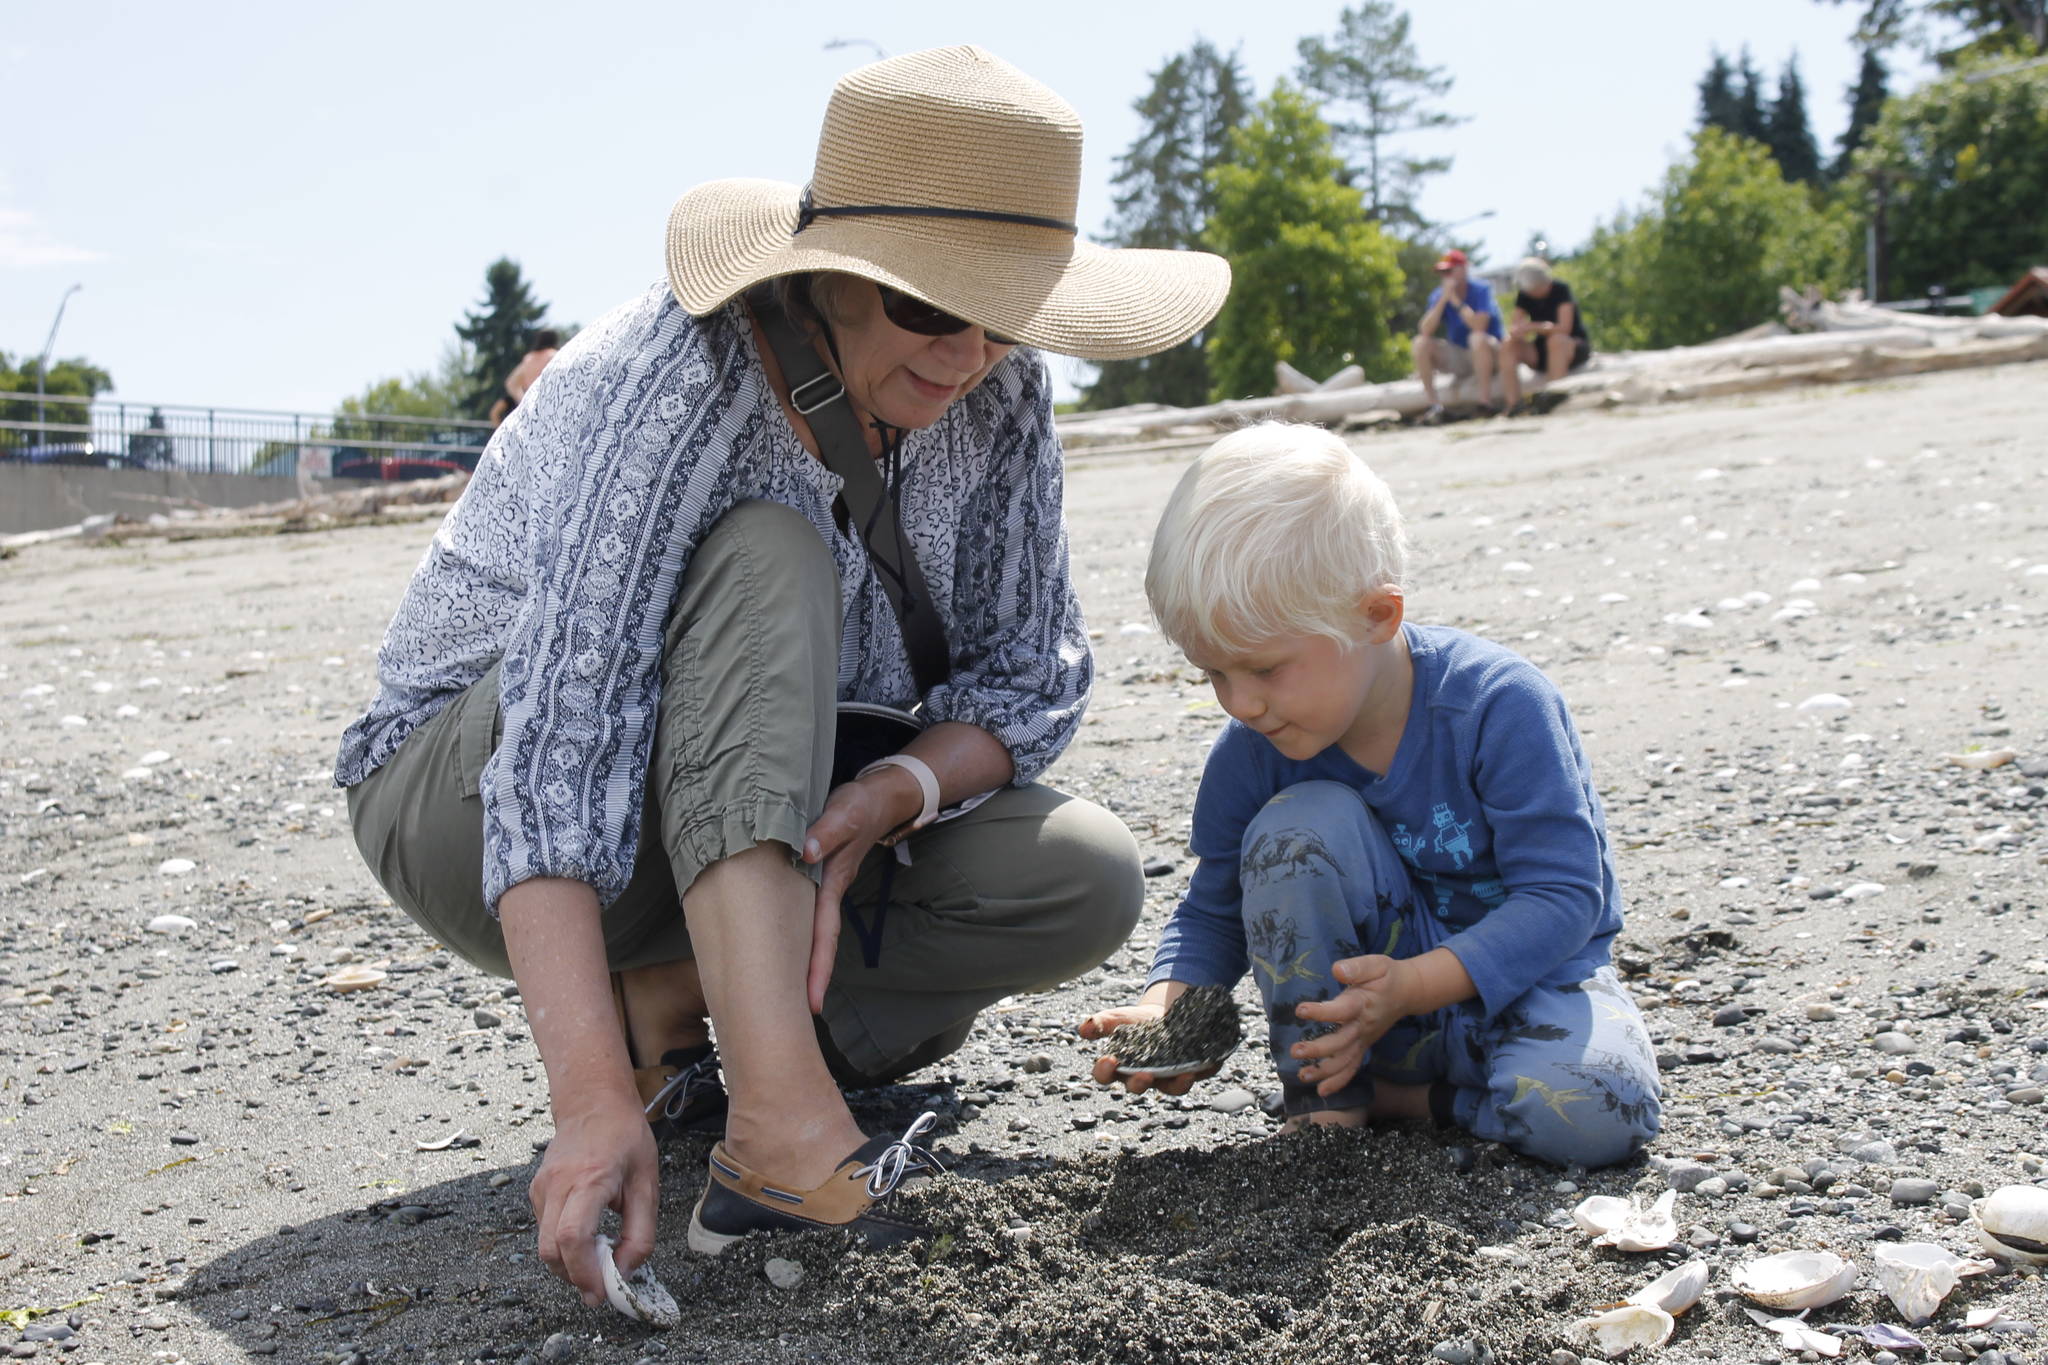 Sue Johnson and her 3-year-old grandson, Mikkel Brown, search for seashells at Clinton Beach Park on Wednesday. (Photo by Kira Erickson/South Whidbey Record)